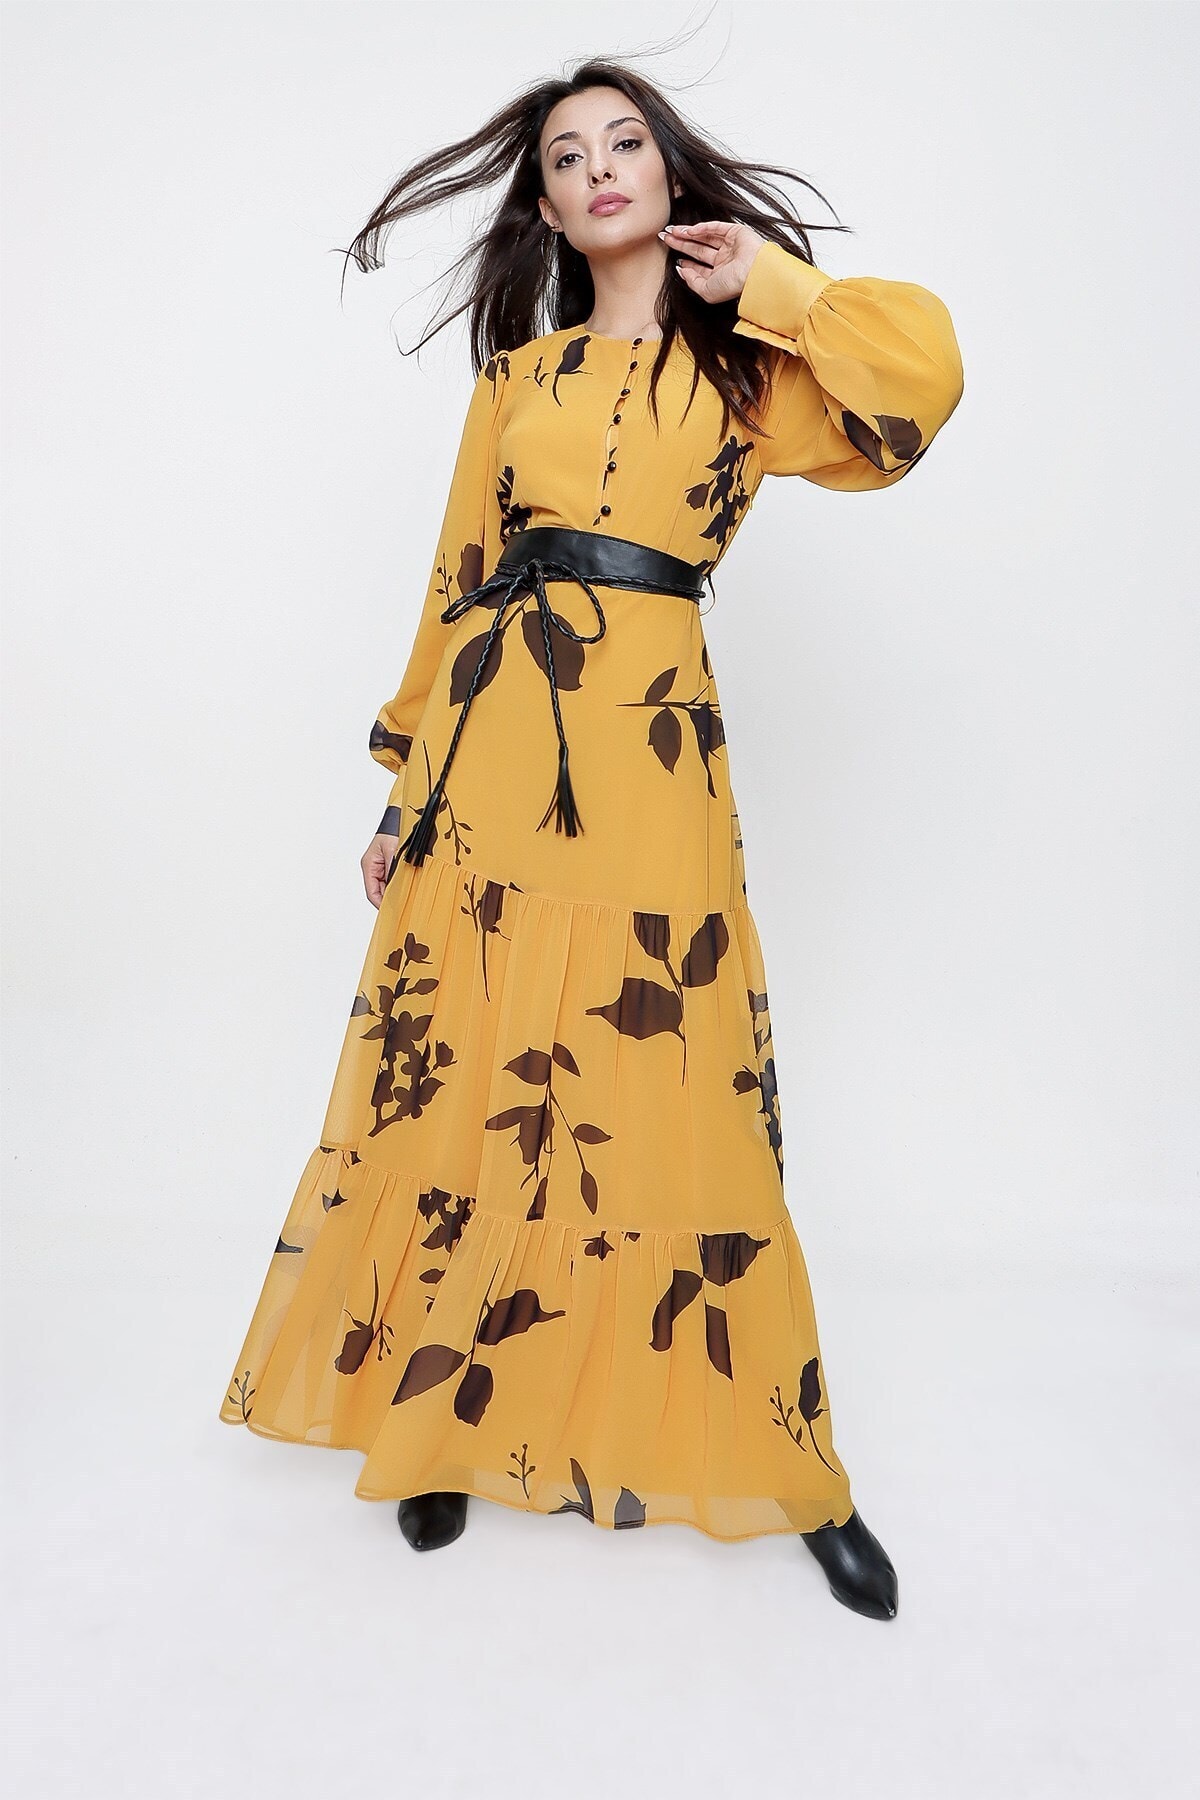 Levně By Saygı Yellow Floral Pattern Long Chiffon Dress with Half-Buttons in the Front with a Belt and Lined Waist.